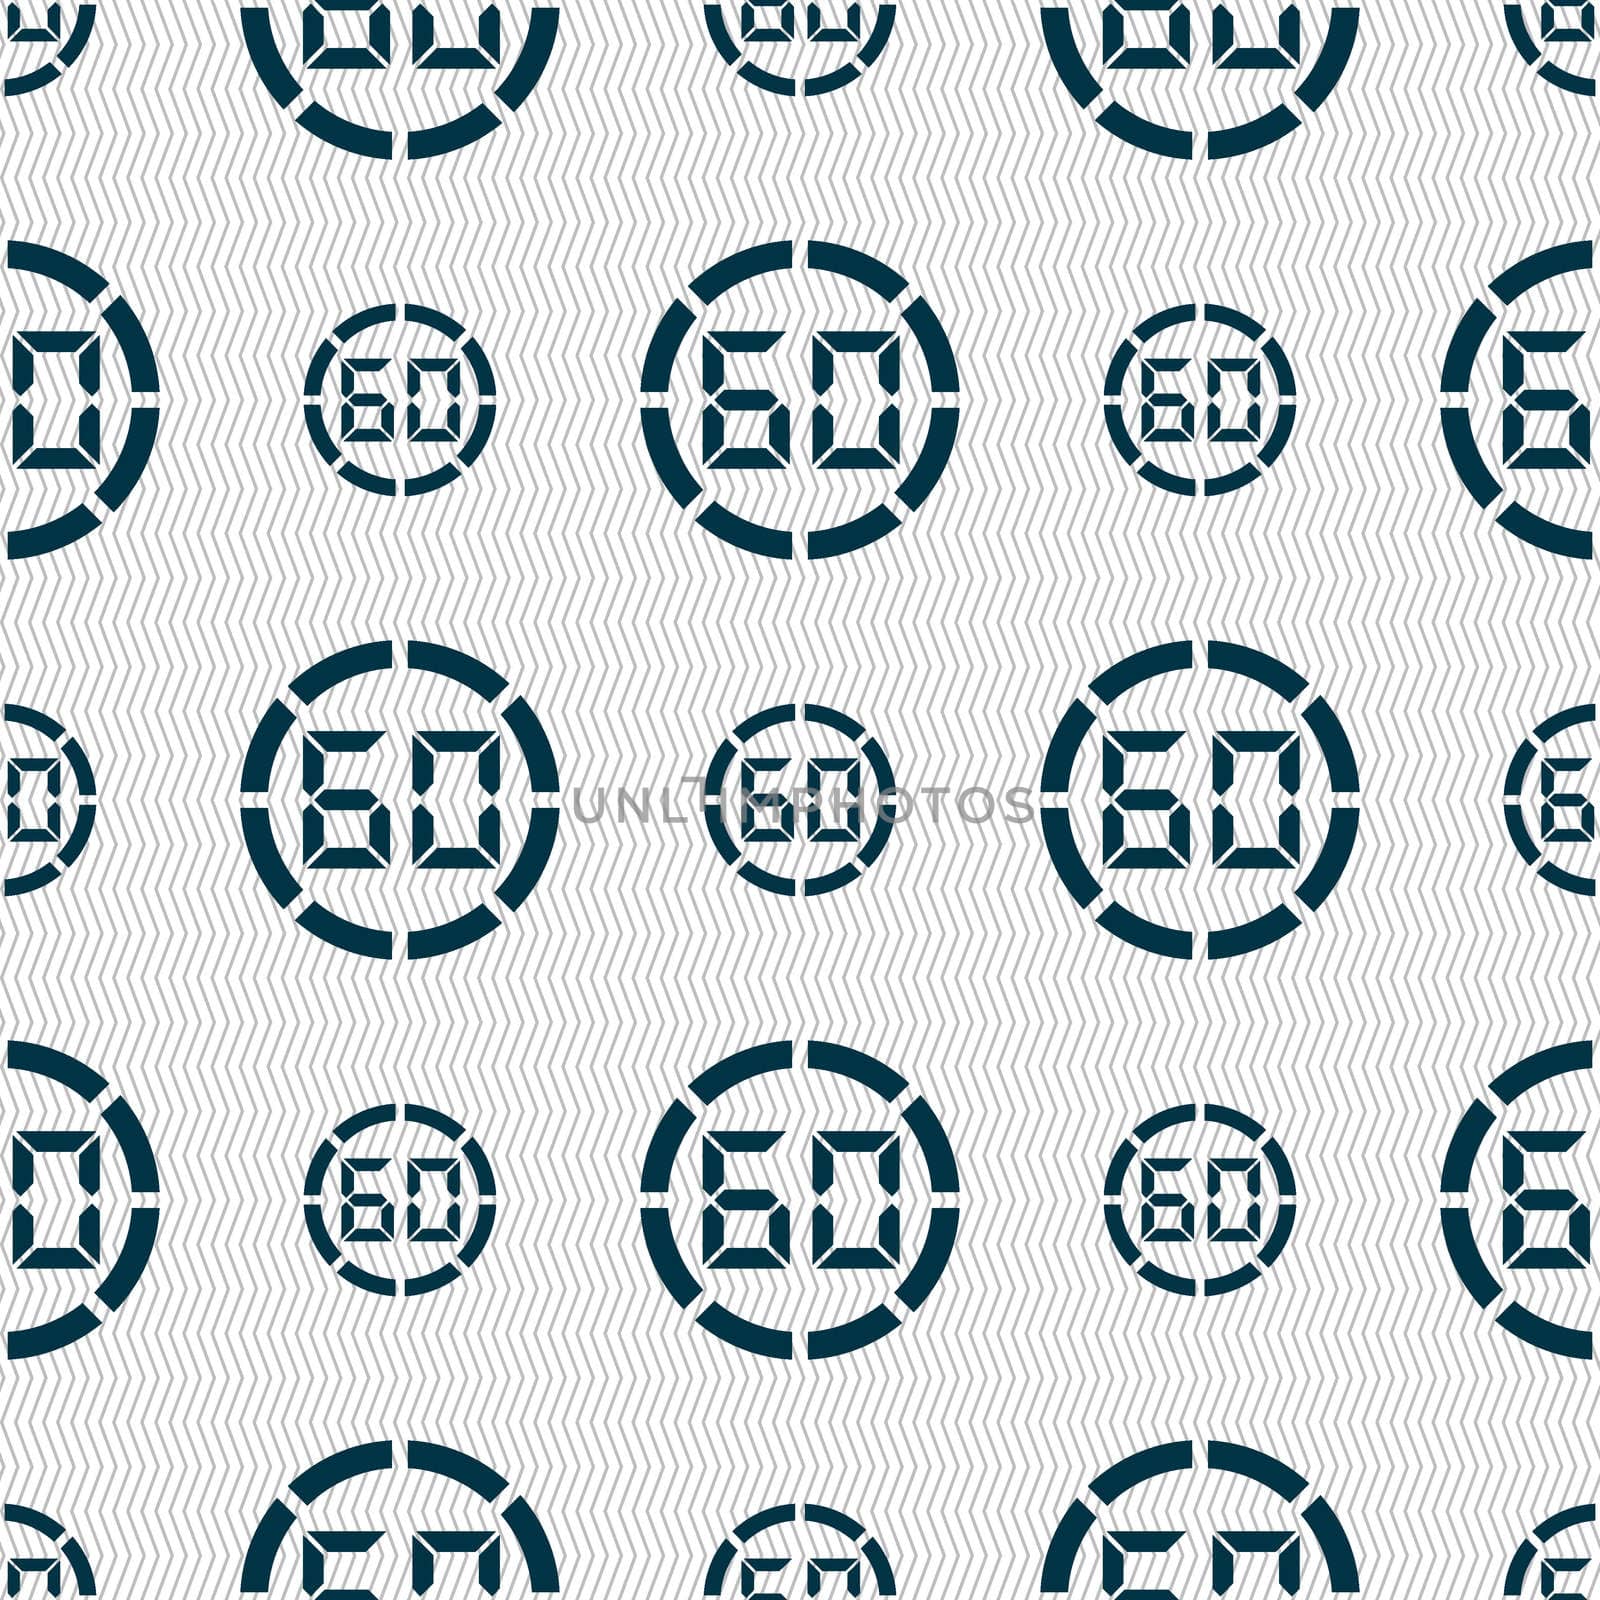 60 second stopwatch icon sign. Seamless abstract background with geometric shapes. illustration